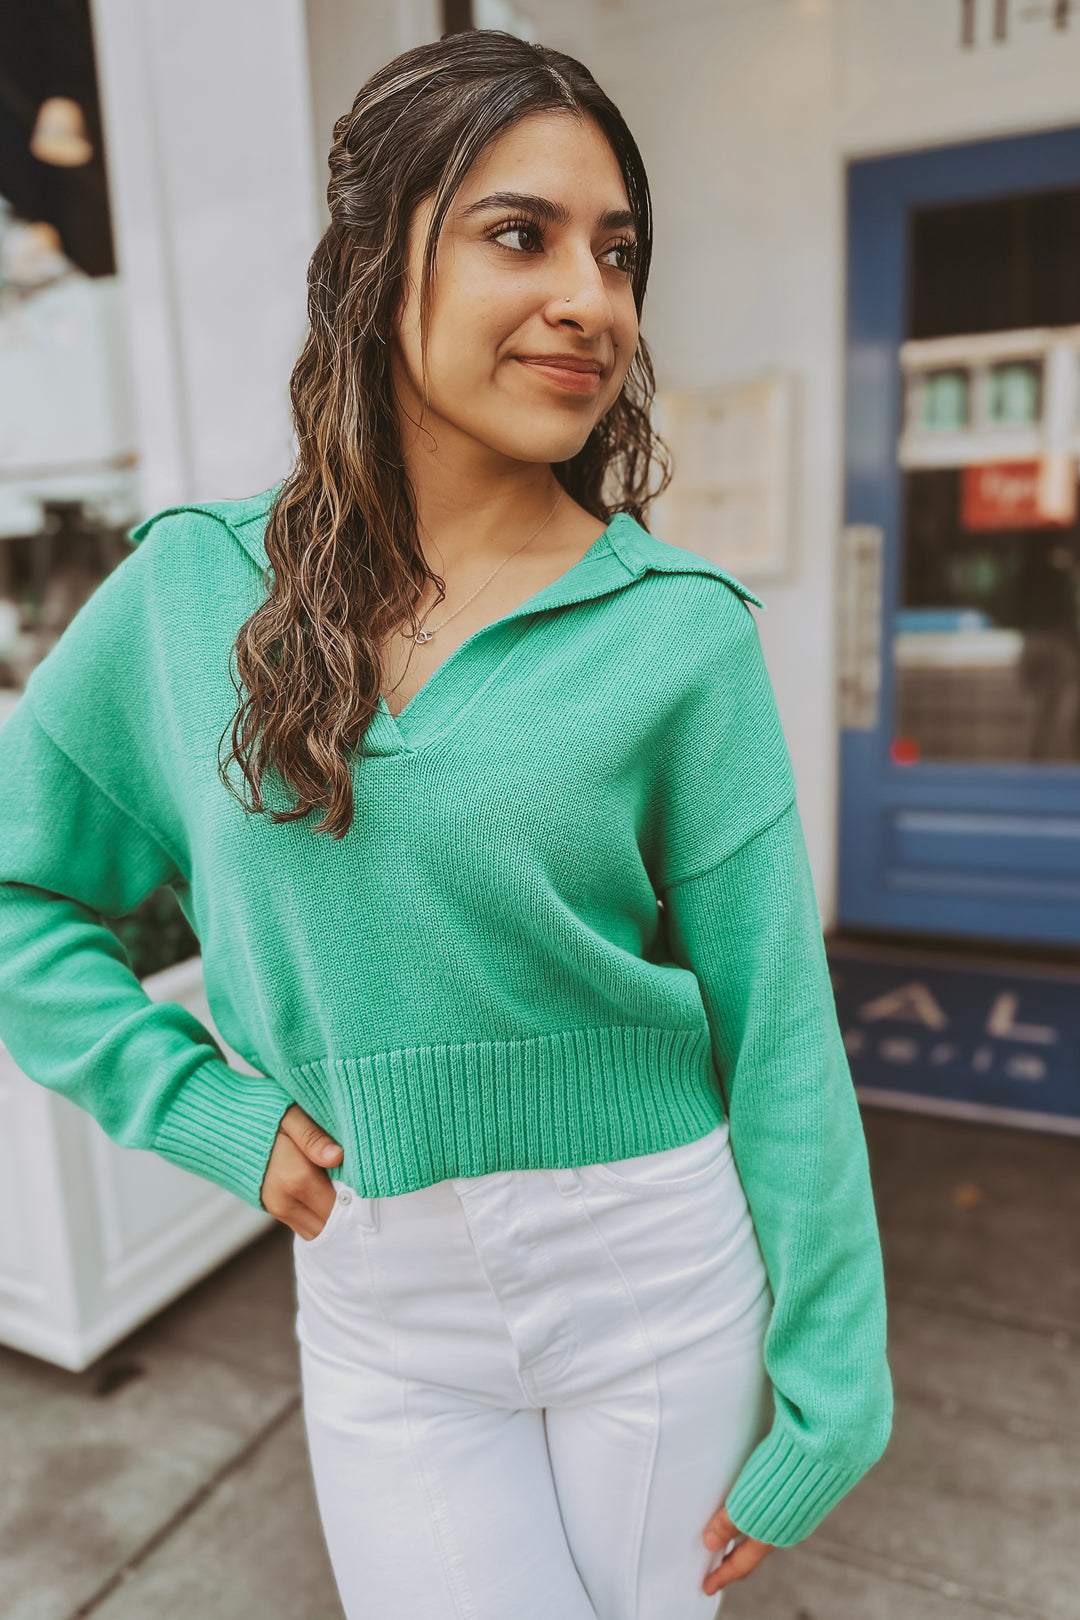 The Roxy Collared Knit Sweater